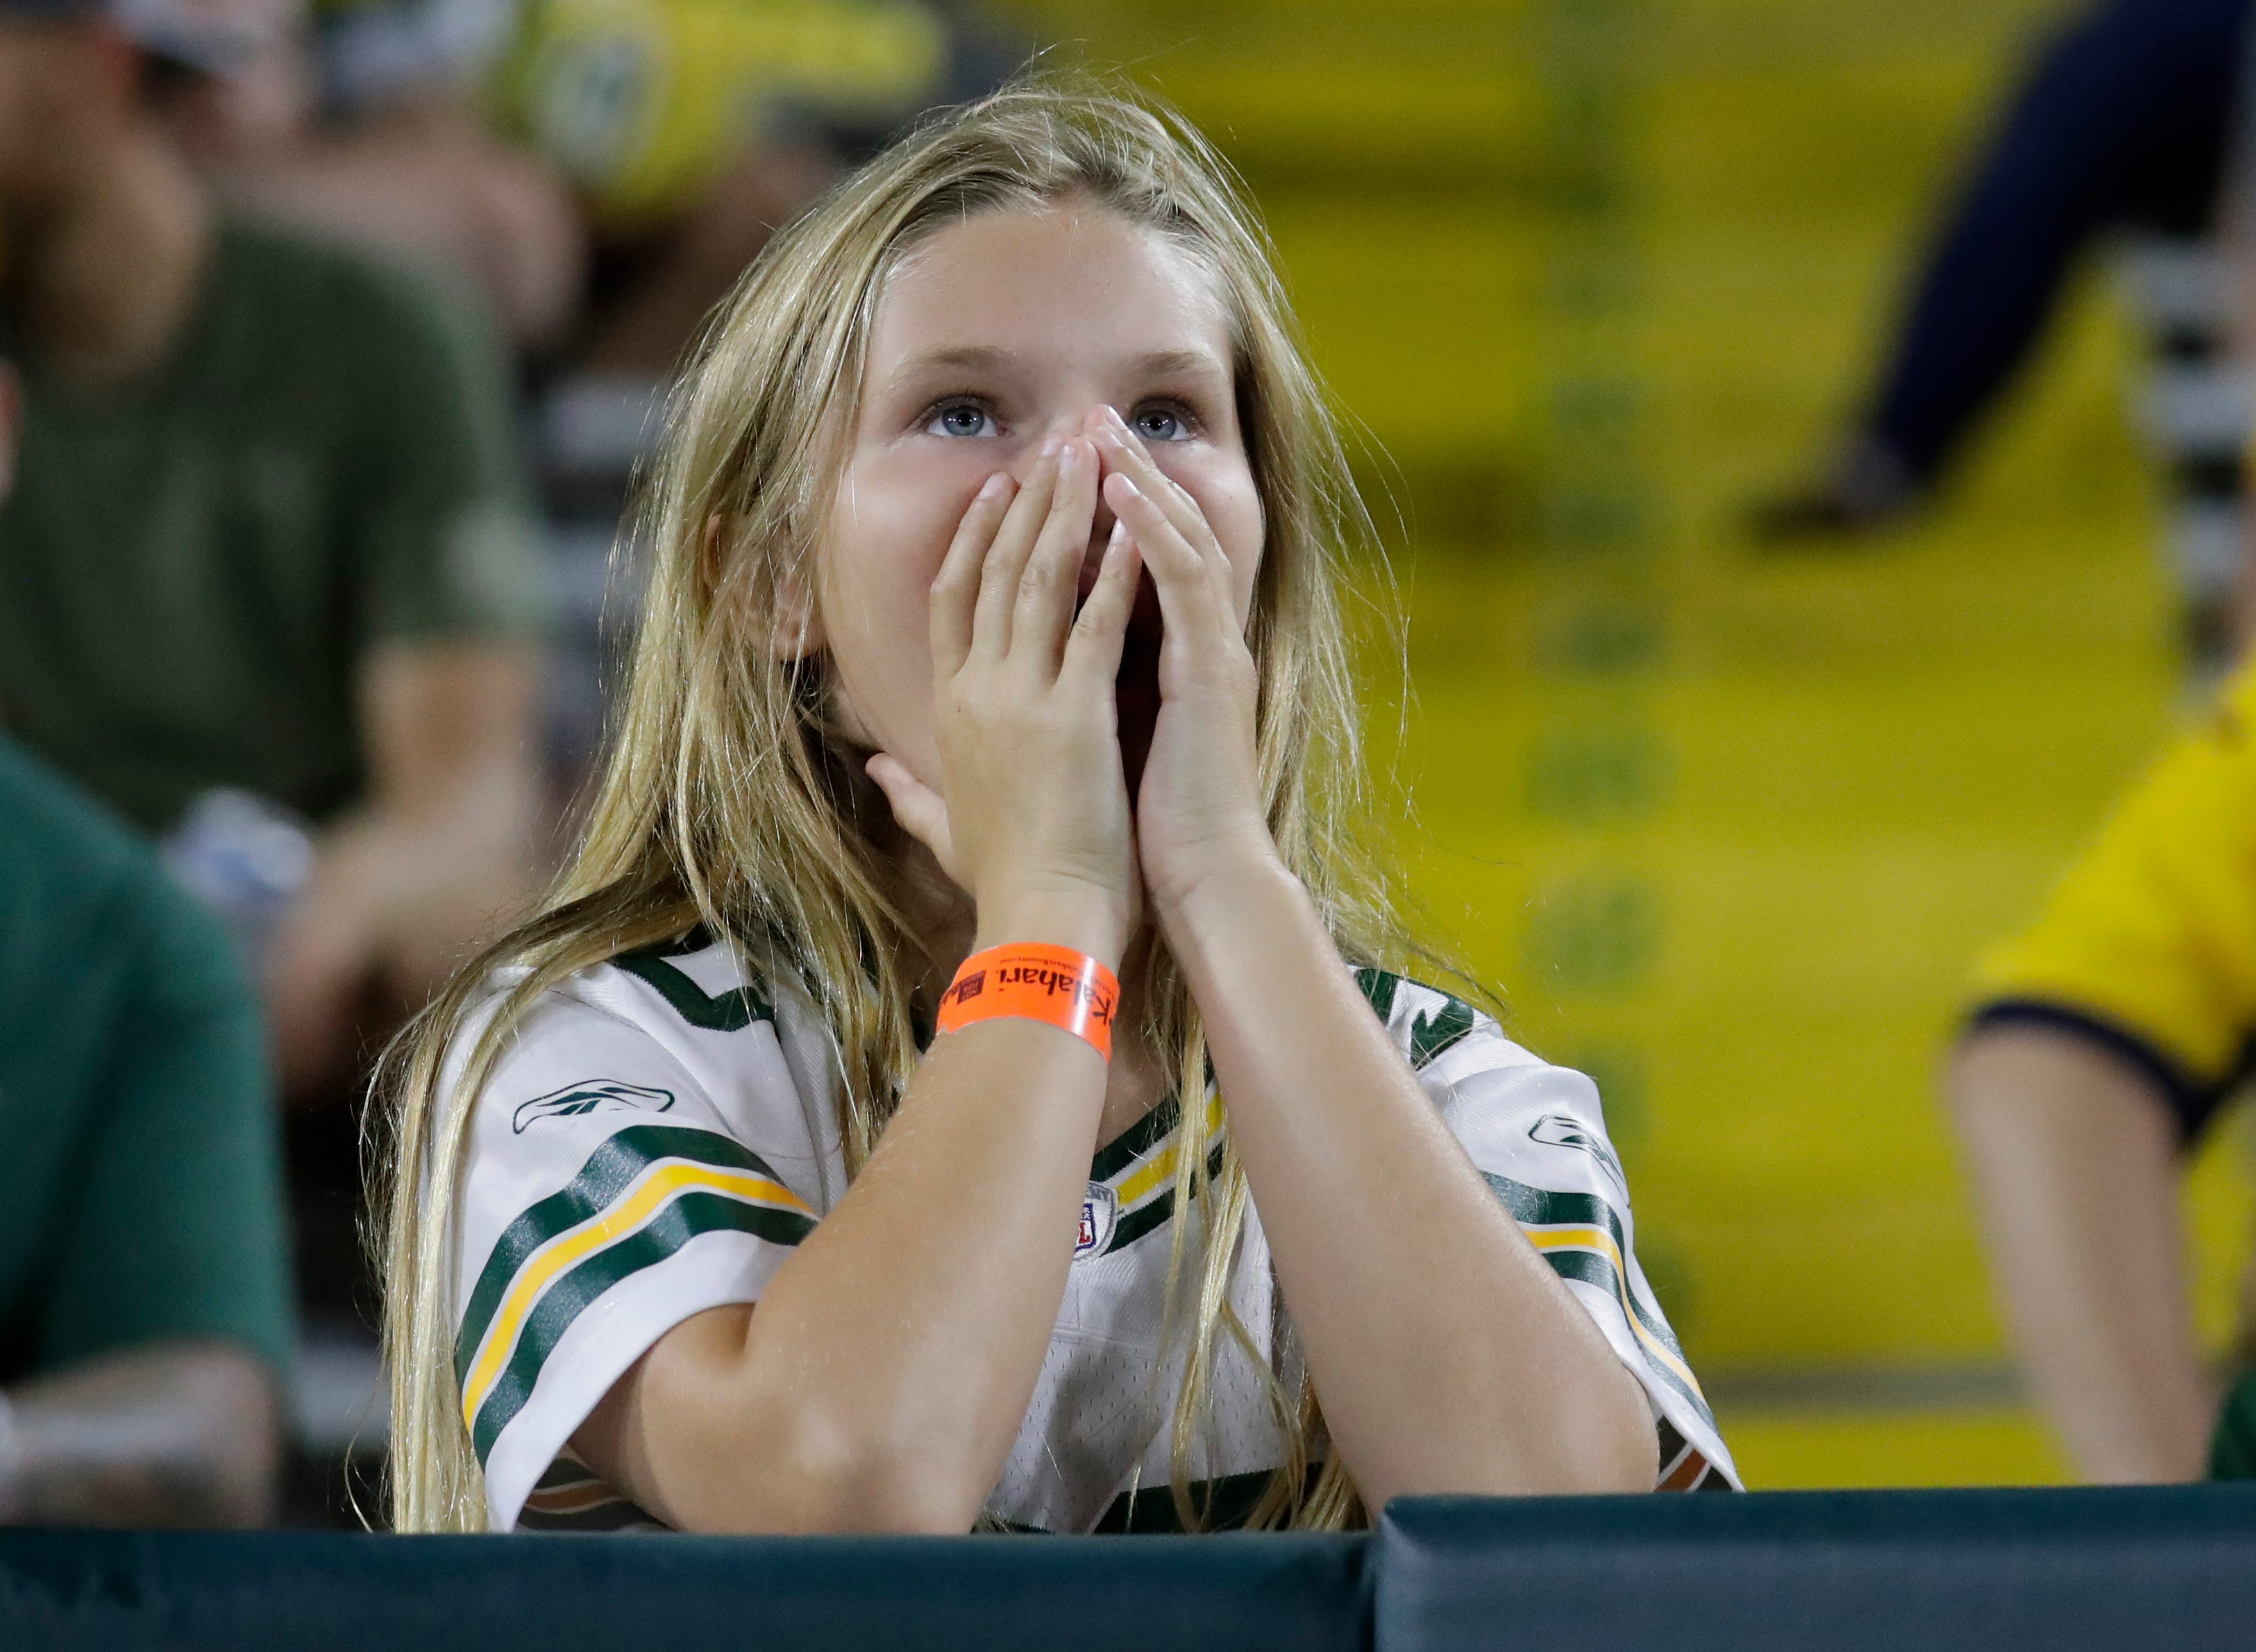 Green Bay Packers fan Stella Wein, 11, of Menomonee Falls looks on as the team falls farther behind the Houston Texans in the fourth quarter during their football game at Lambeau Field in Green Bay.